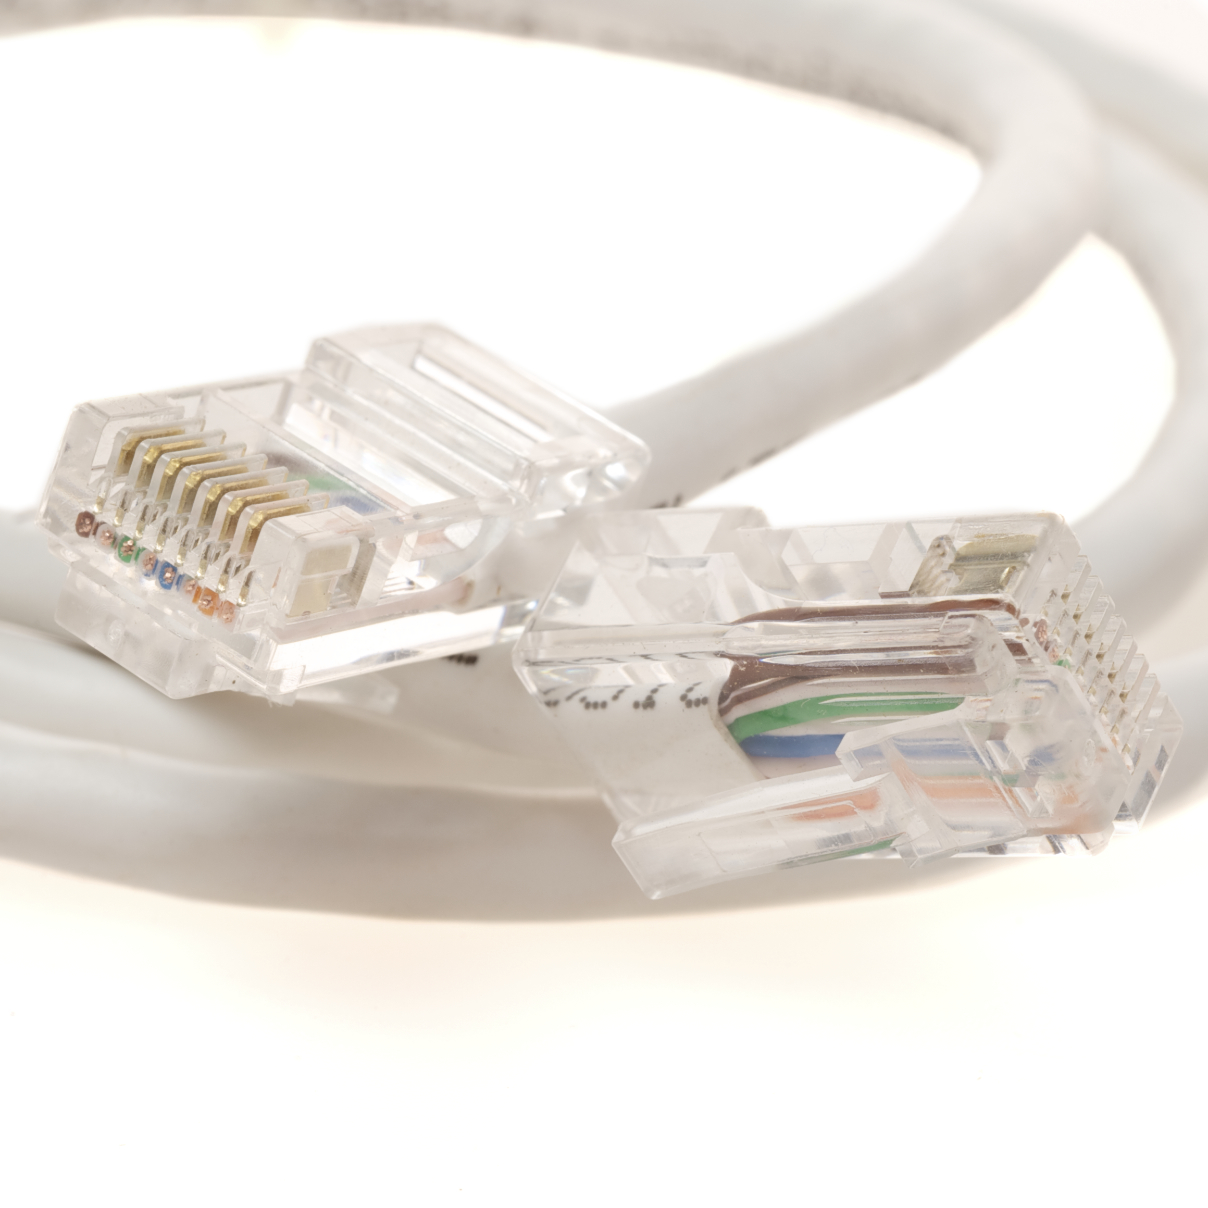 25 Feet Category 5e Network Patch Cable- Plenum Rated for in-ceiling installations!